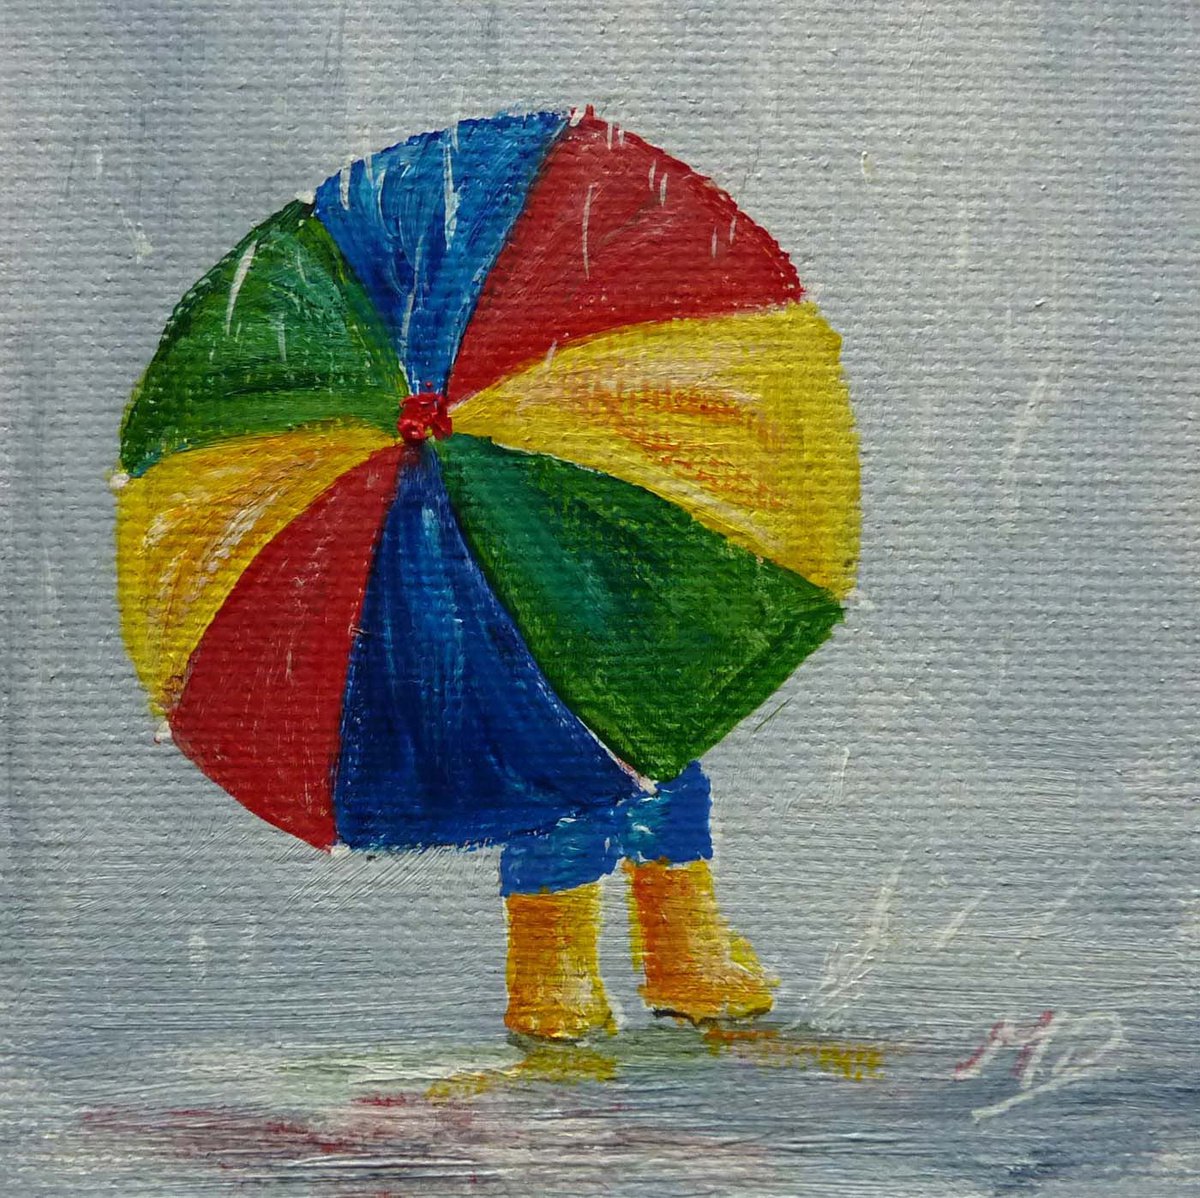 Umbrella With Boots by Margaret Denholm